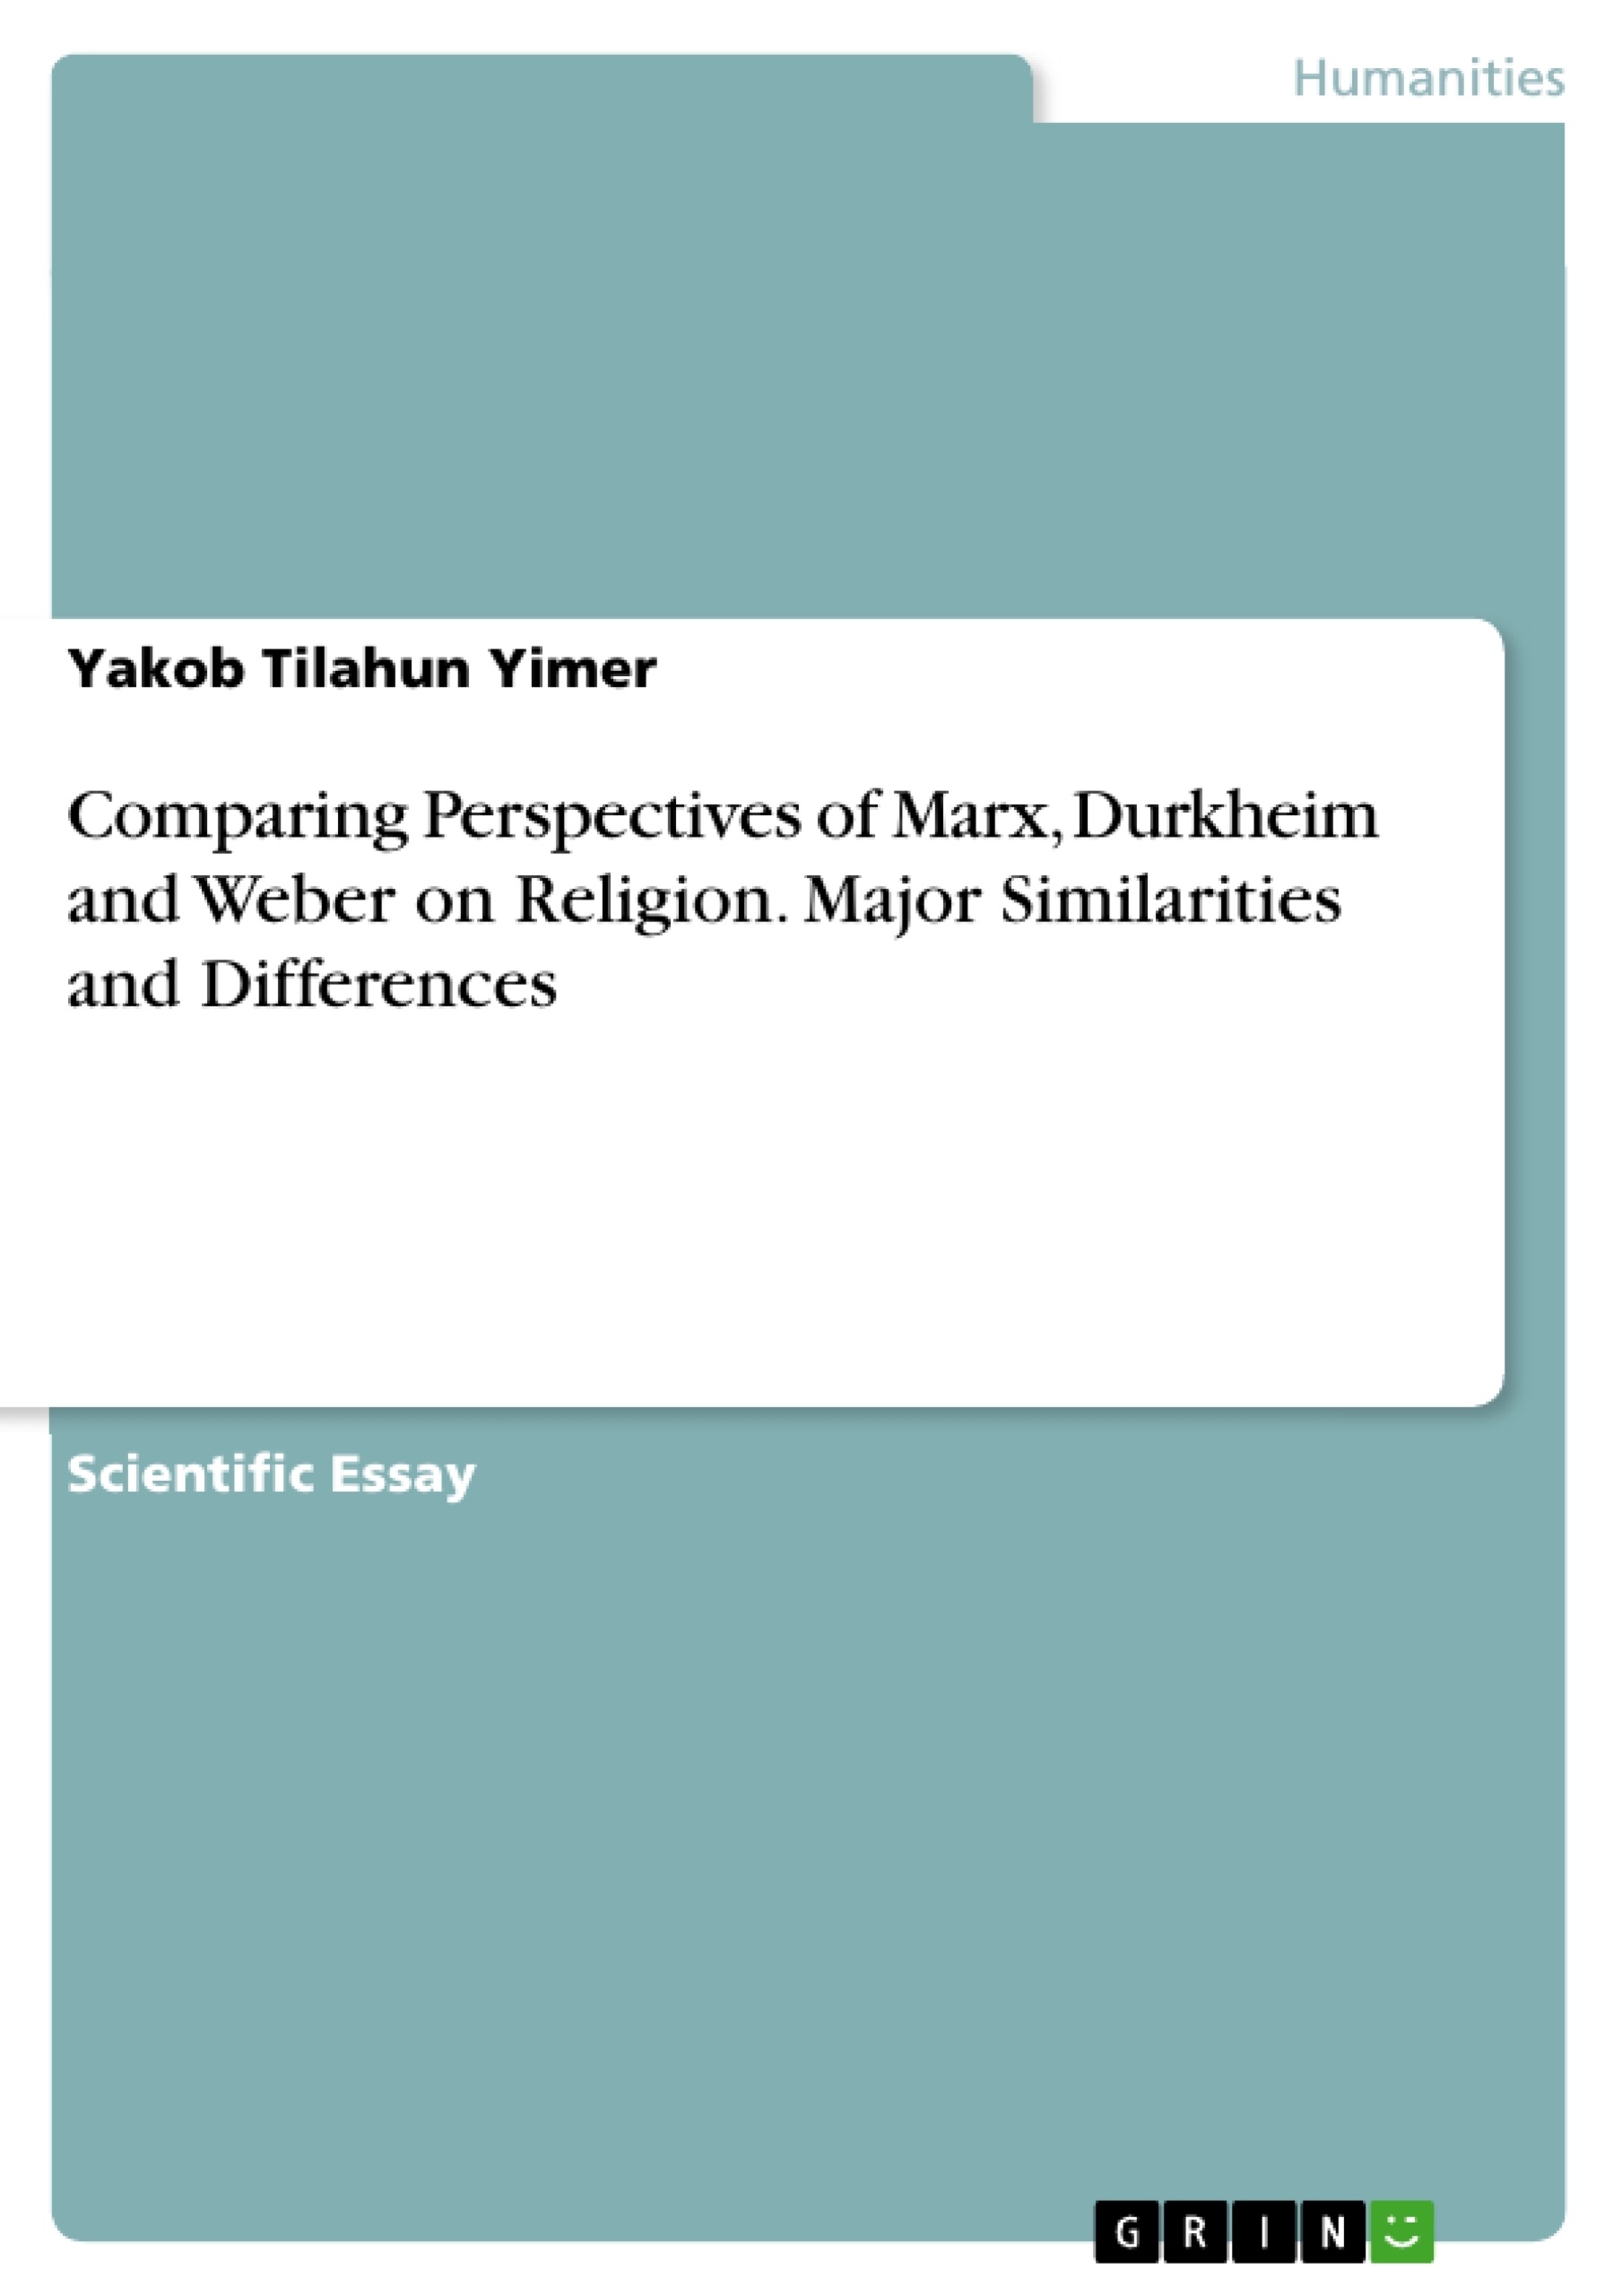 Title: Comparing Perspectives of Marx, Durkheim and Weber on Religion. Major Similarities and Differences